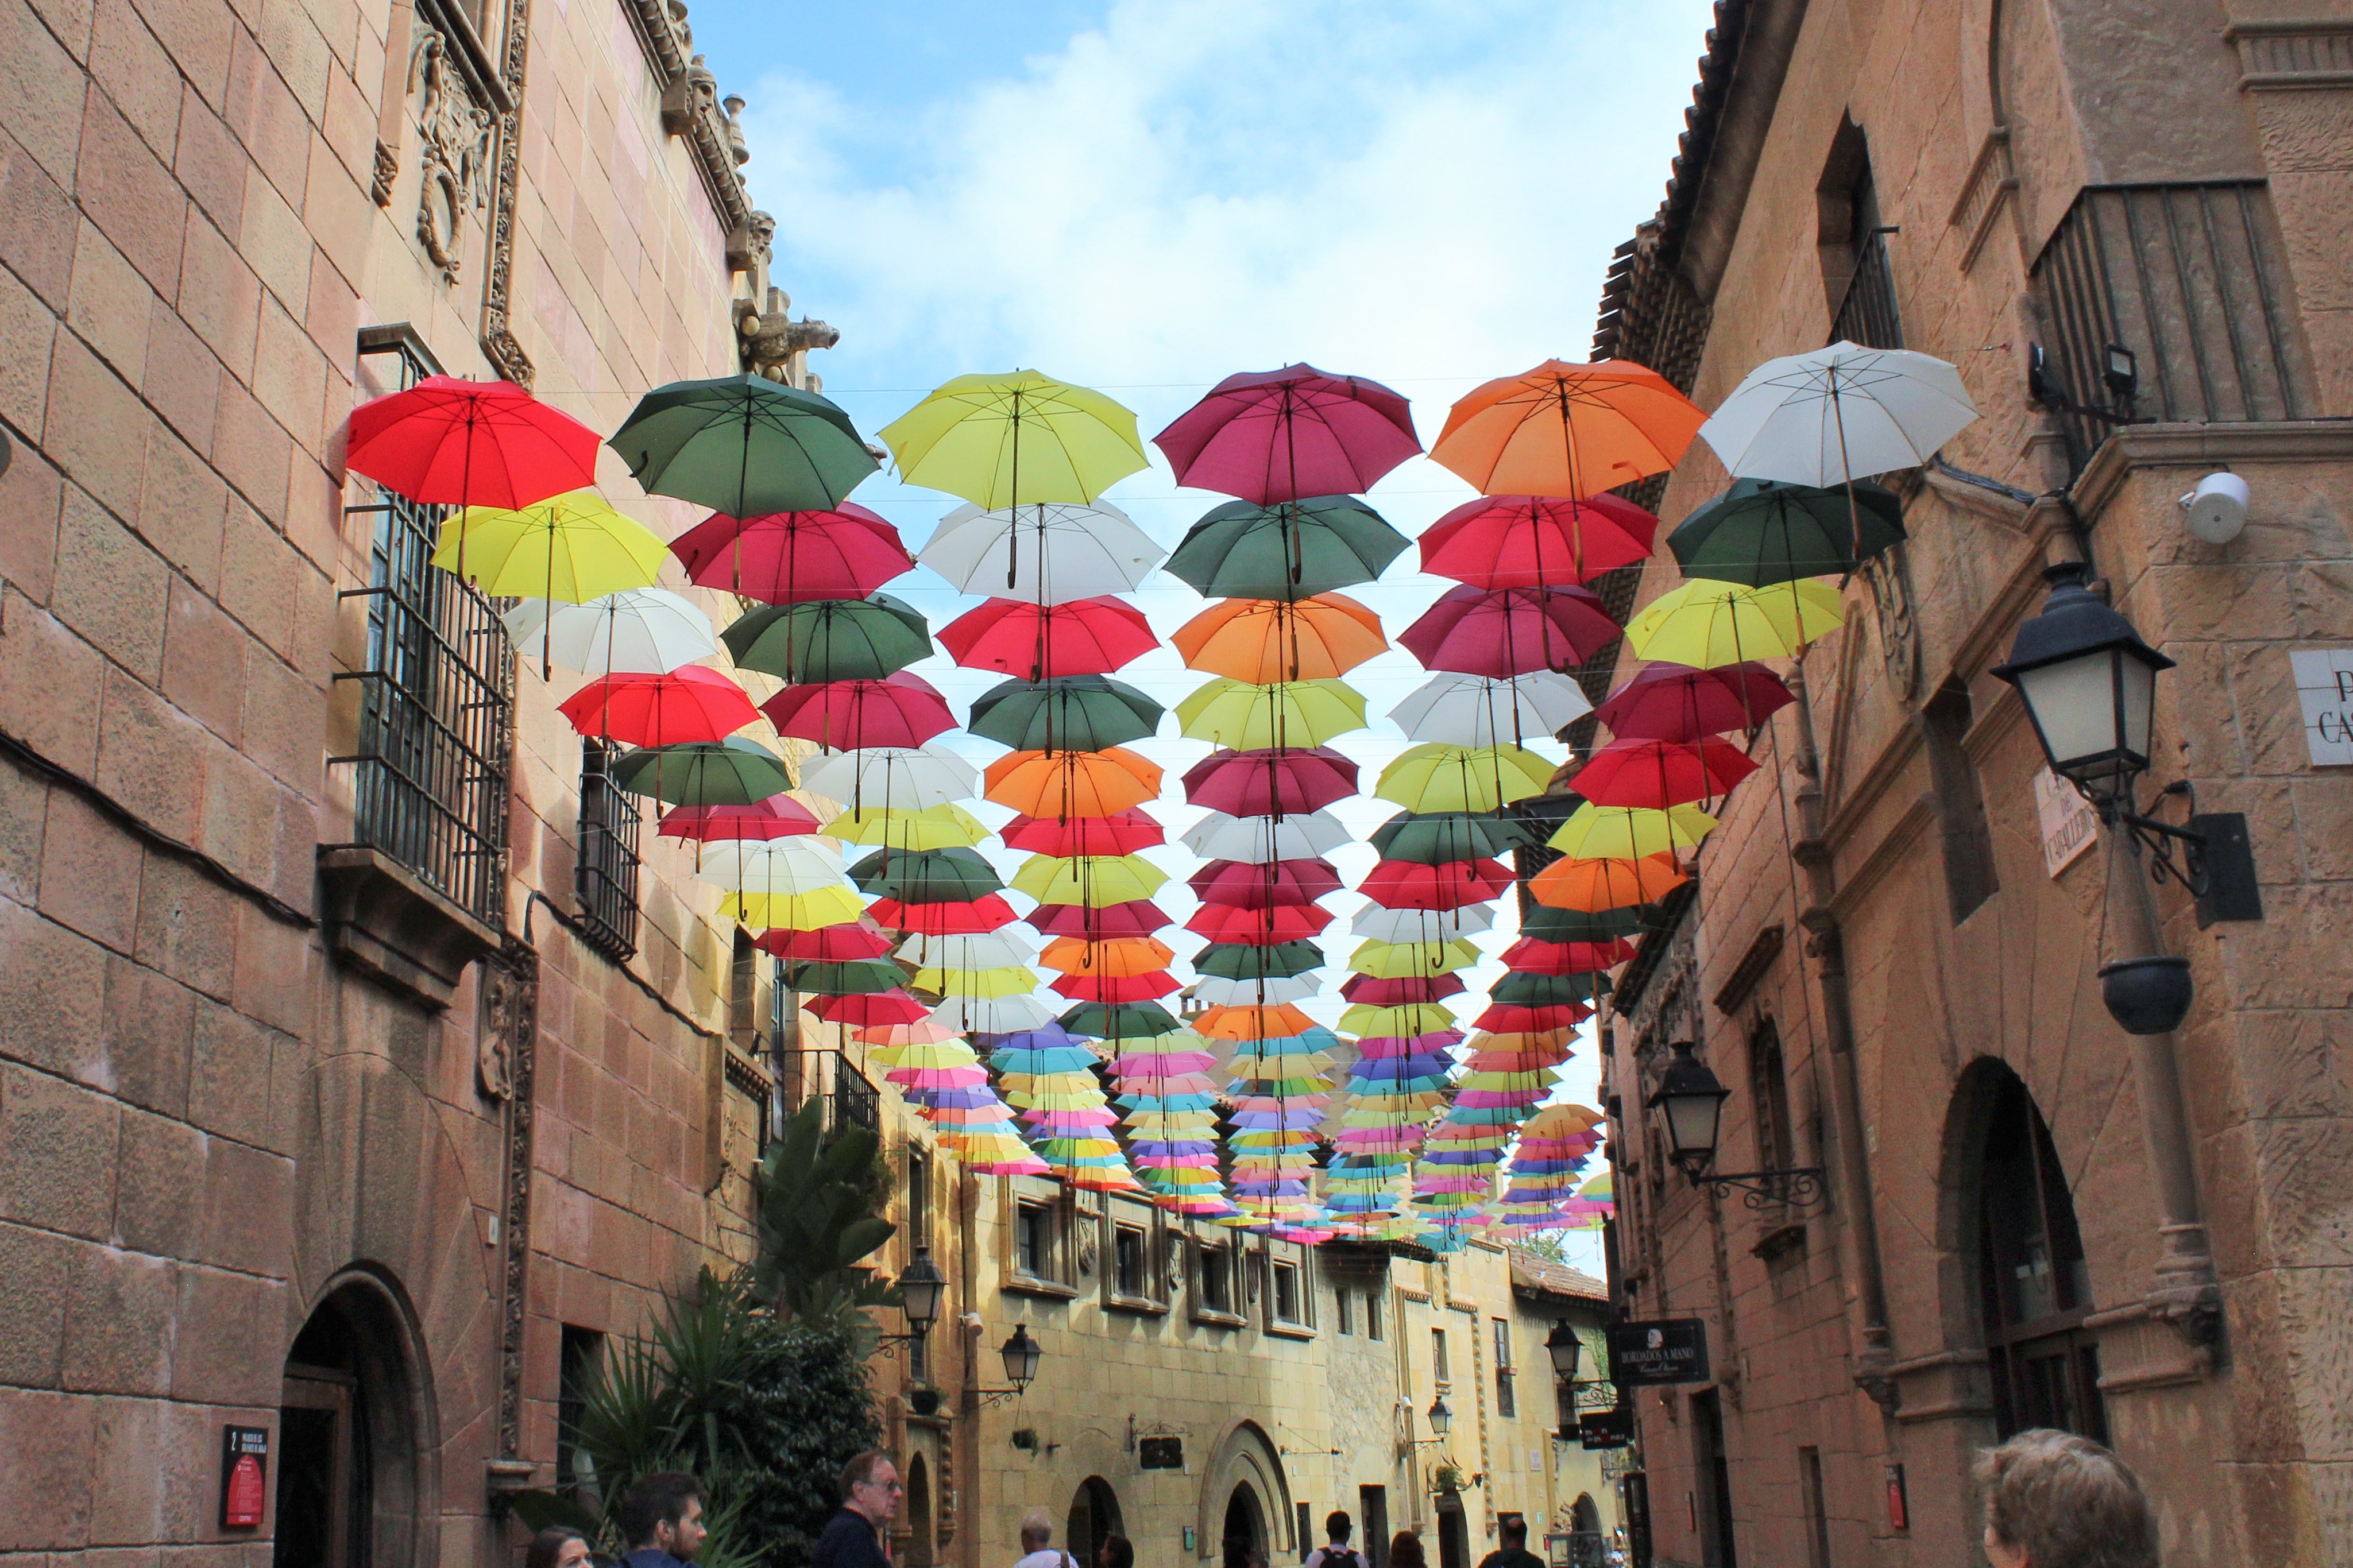 Colorful umbrellas hanging above a street in Poble Espanyol